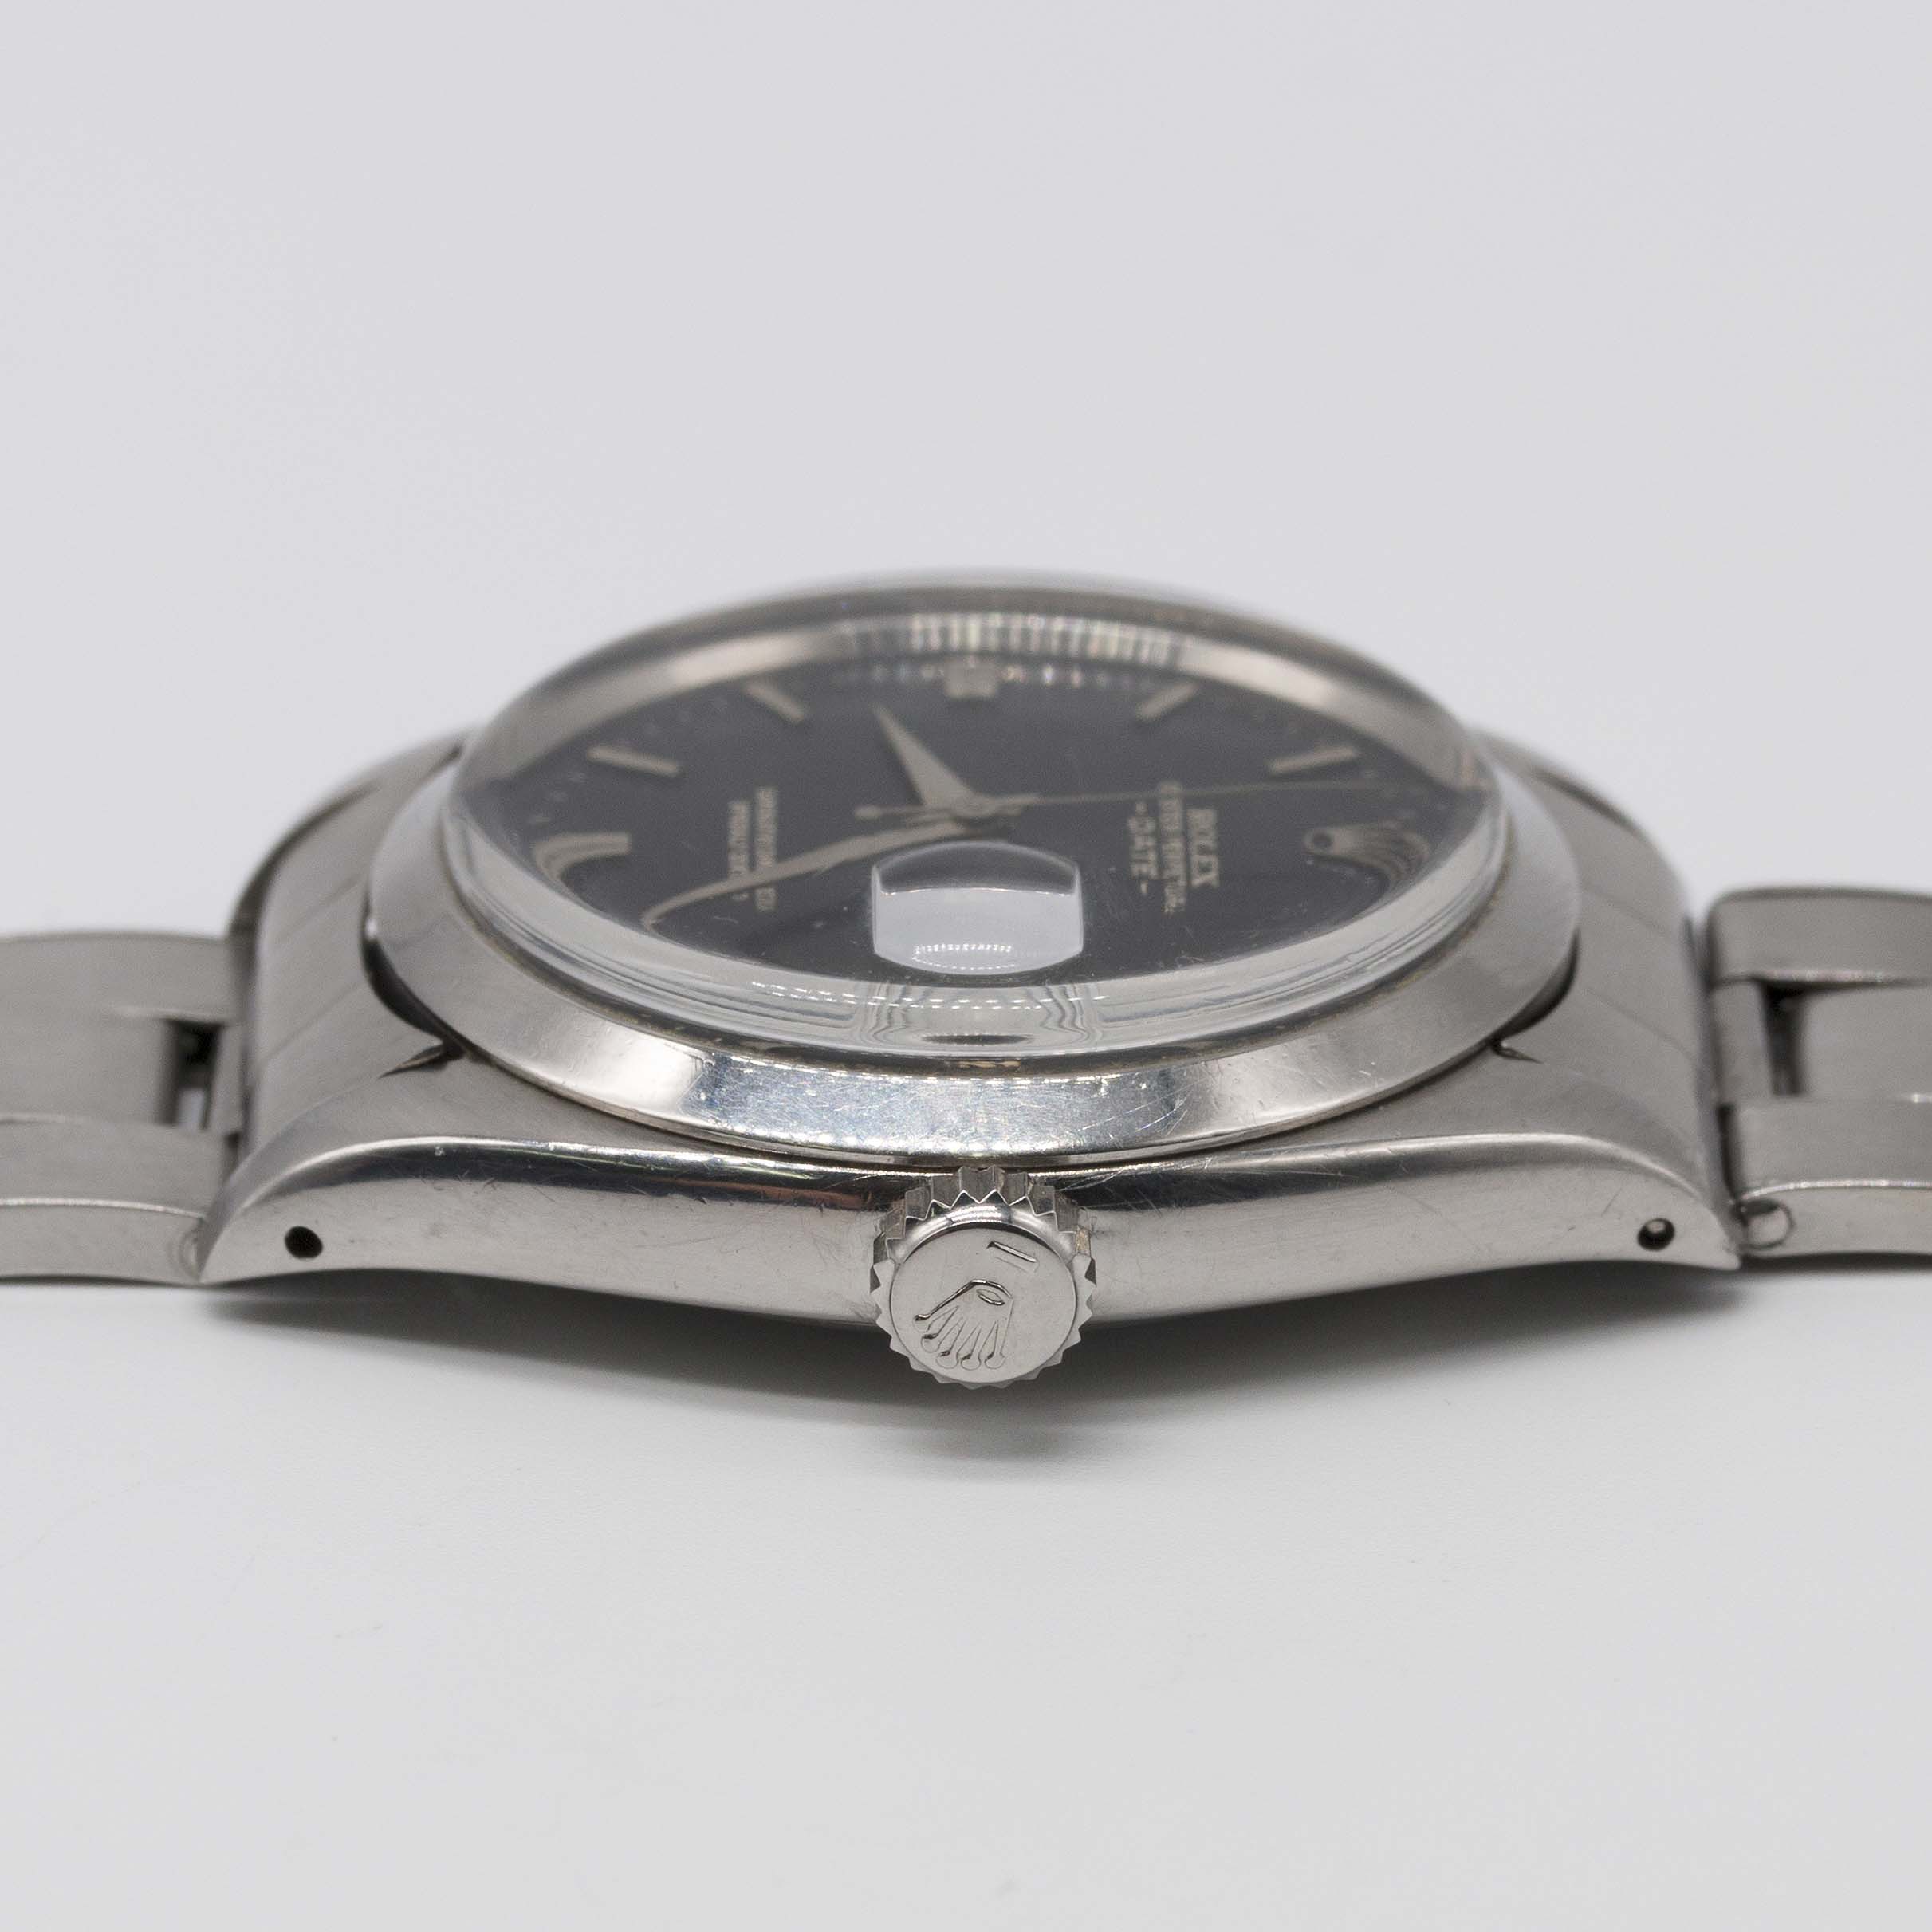 A GENTLEMAN'S STAINLESS STEEL ROLEX OYSTER PERPETUAL DATE BRACELET WATCH CIRCA 1961, REF. 1500 GLOSS - Image 10 of 12